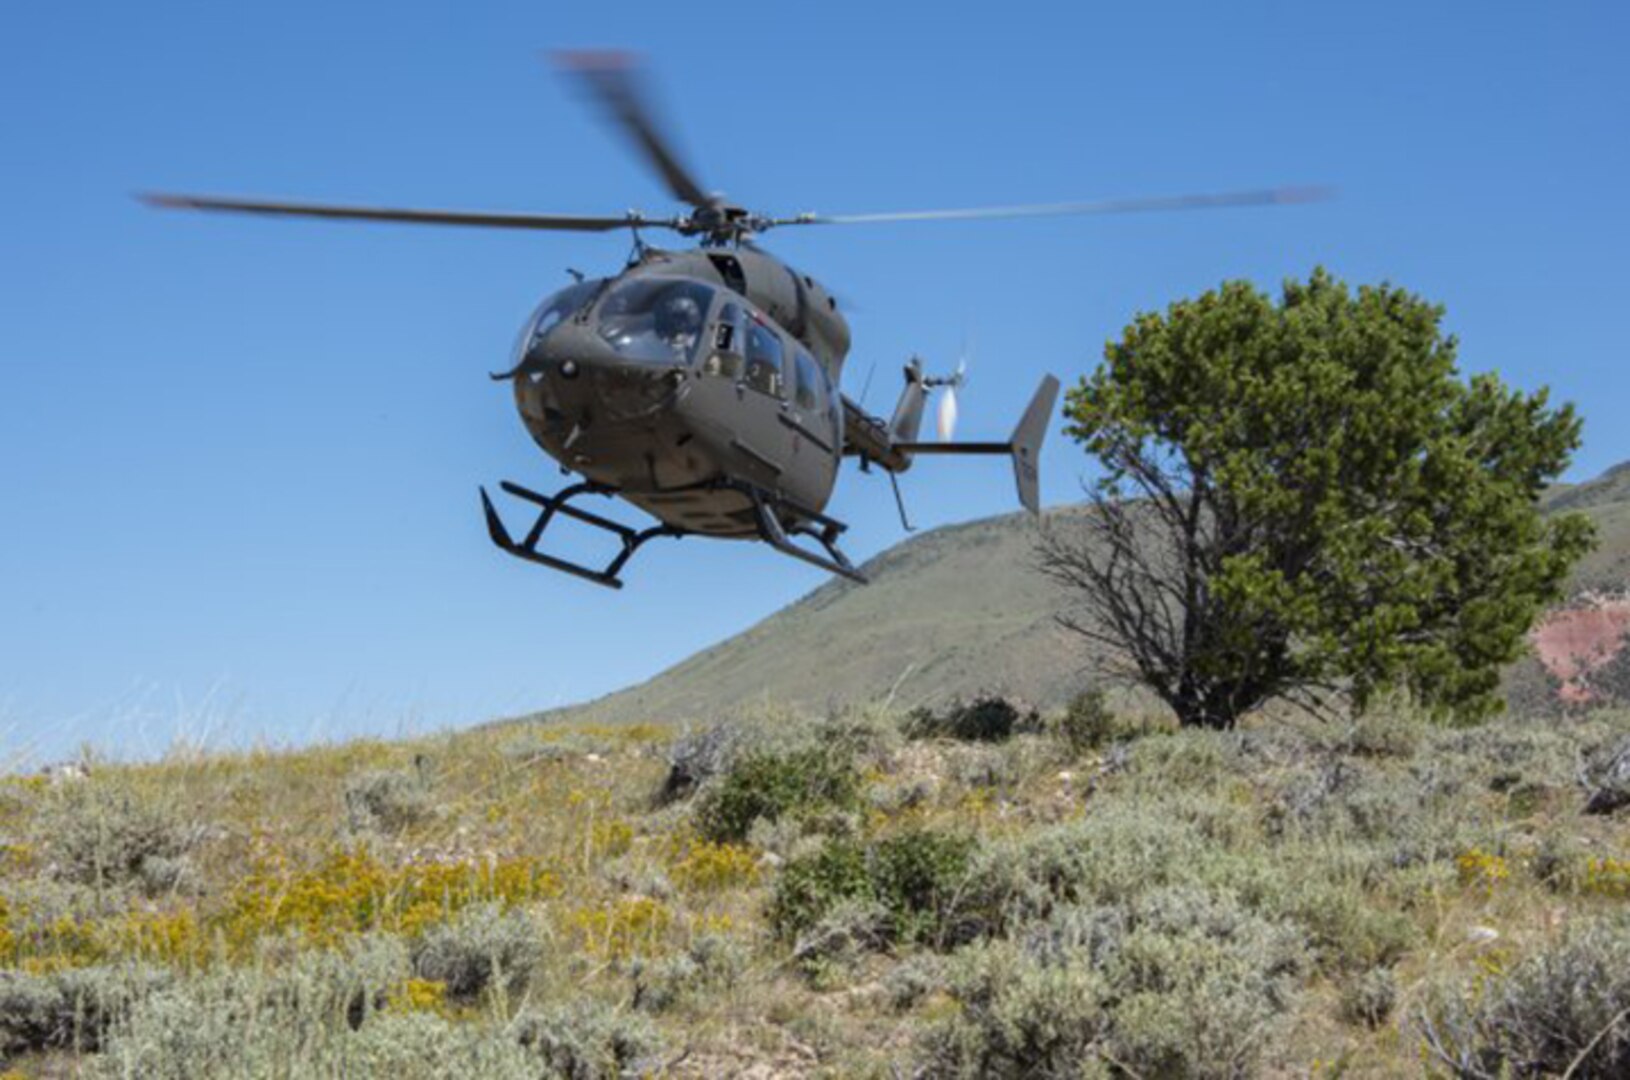 Students practice on mountainous landing zones during the weeklong training program at the High-Altitude Army National Guard Aviation Training Site in Gypsum, Colo., Aug. 27, 2019. HAATS instructs about 350 students per year across the U.S. military as well as from foreign militaries. It is mainly run by Colorado Army National Guard Soldiers.